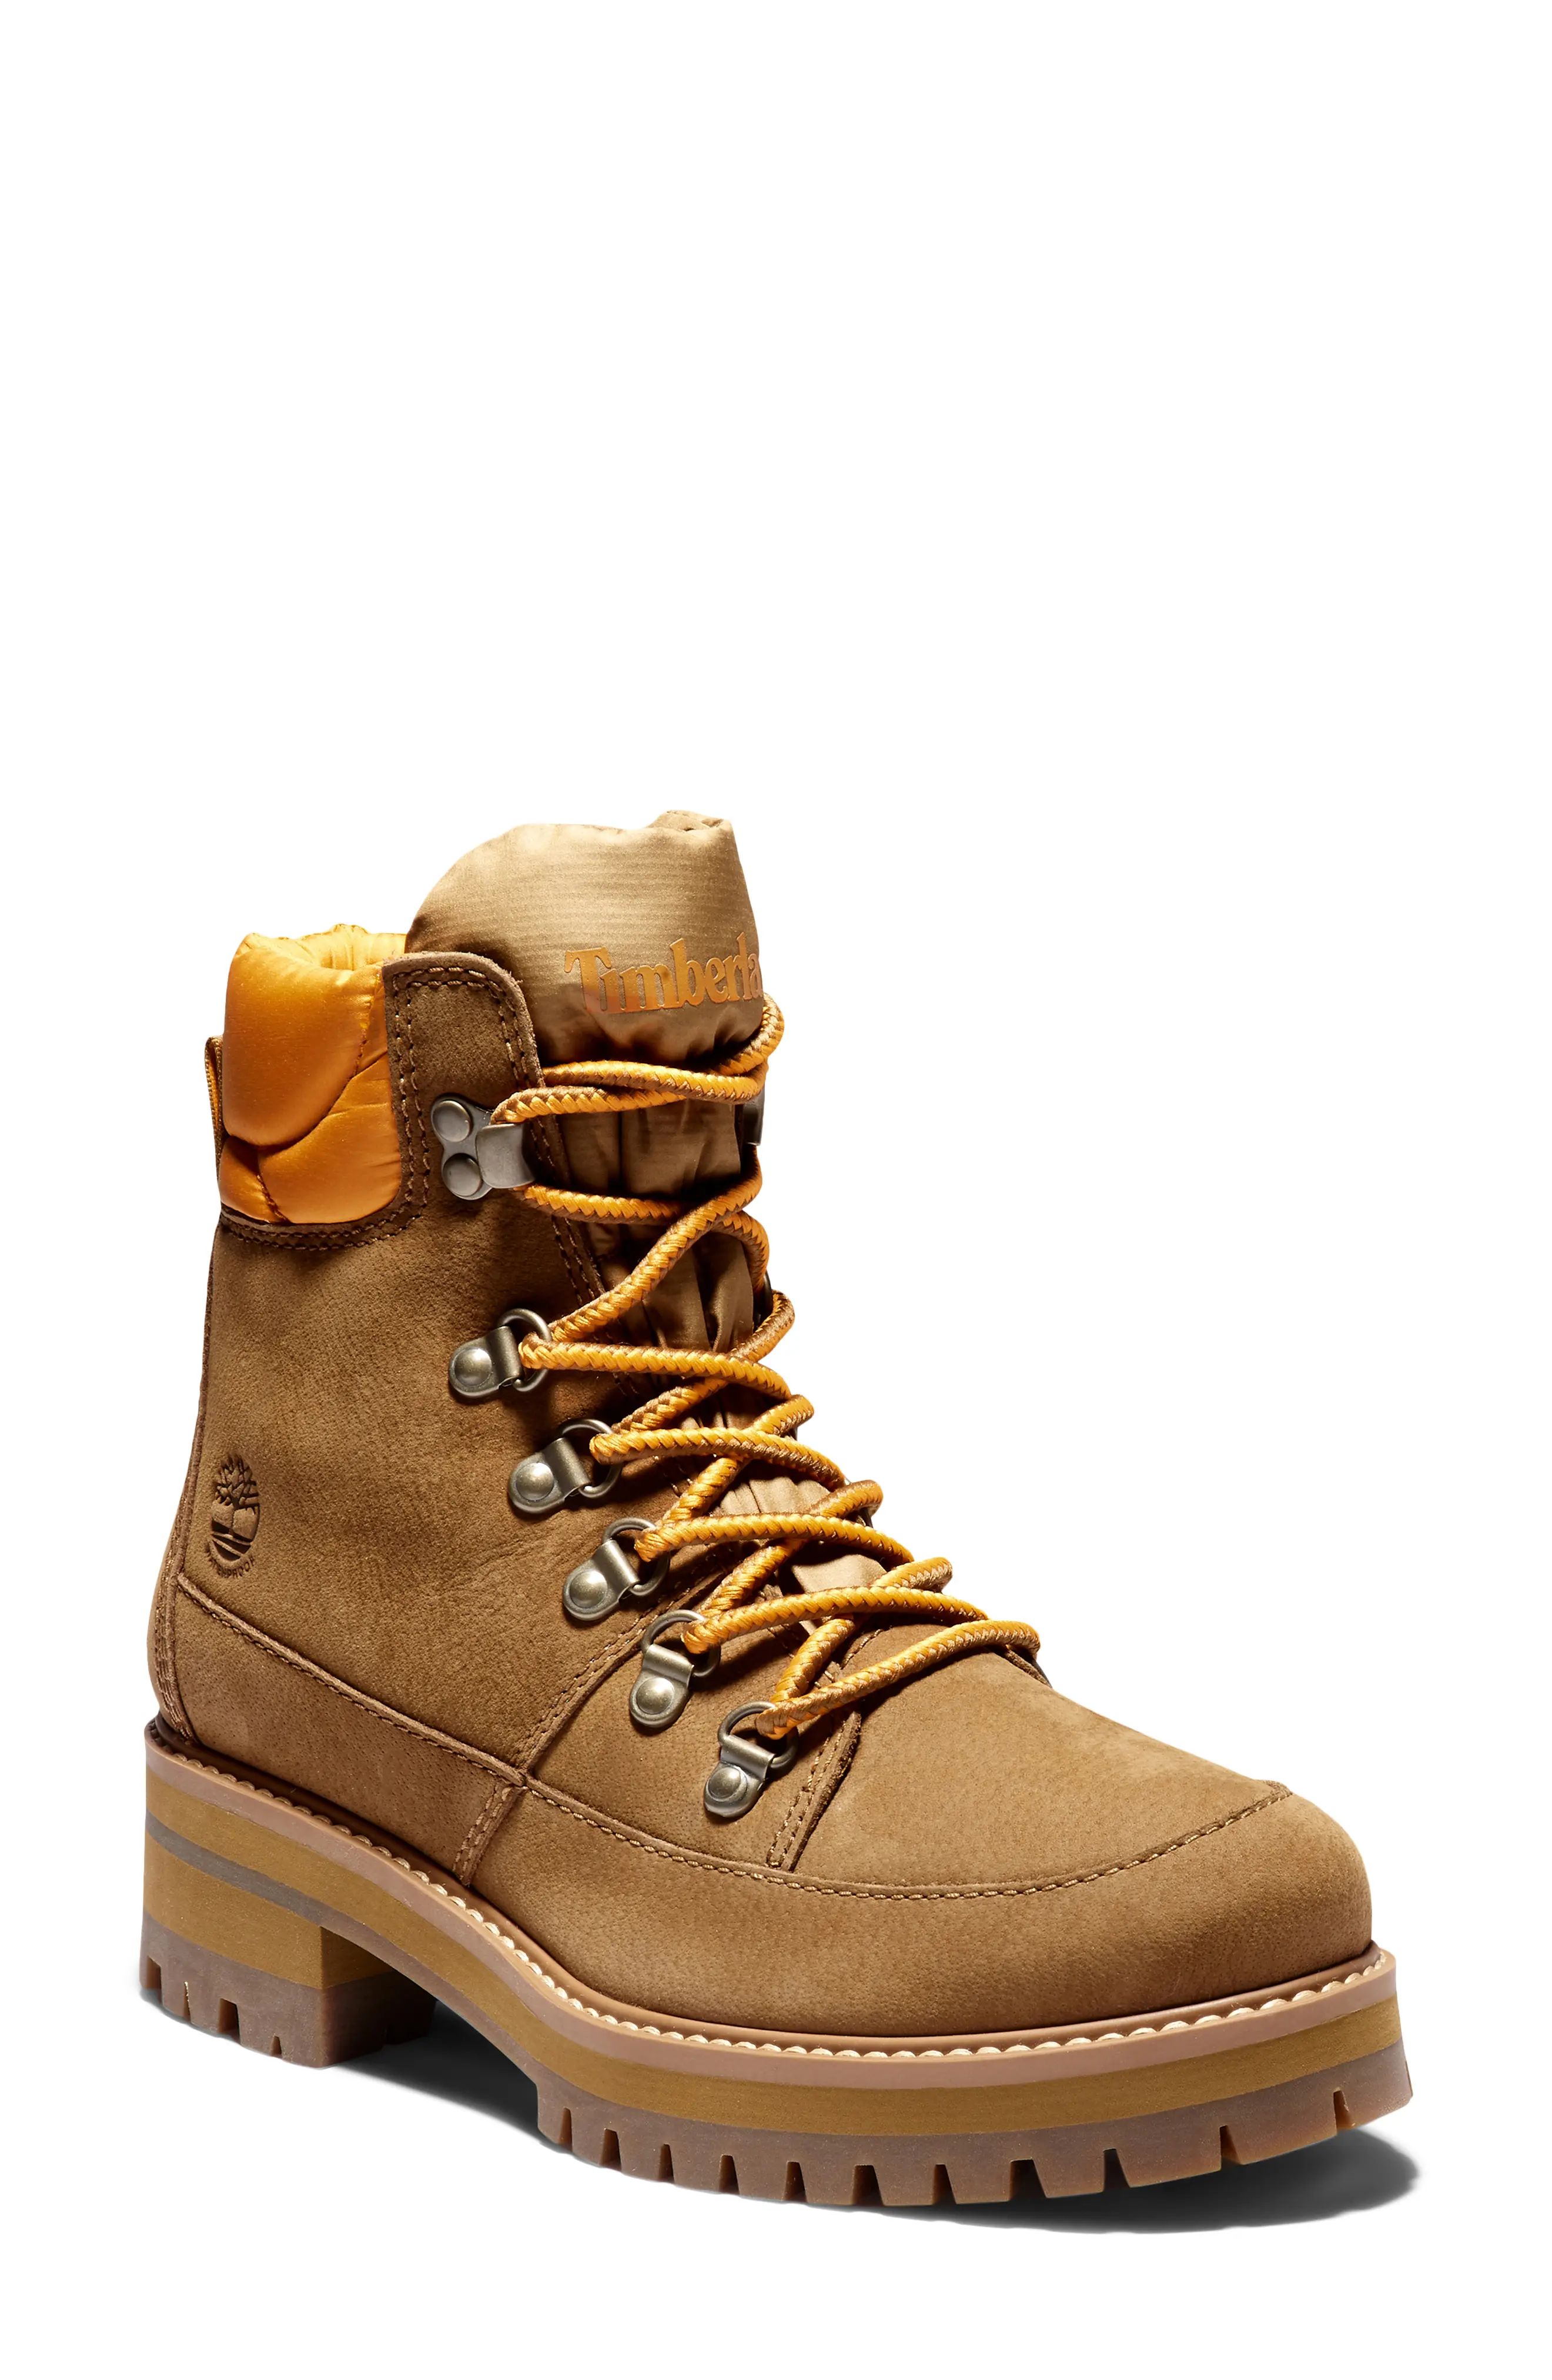 Timberland Courmayeur Valley Waterproof Hiking Boot in Medium Brown Nubuck Leather at Nordstrom, Siz | Nordstrom